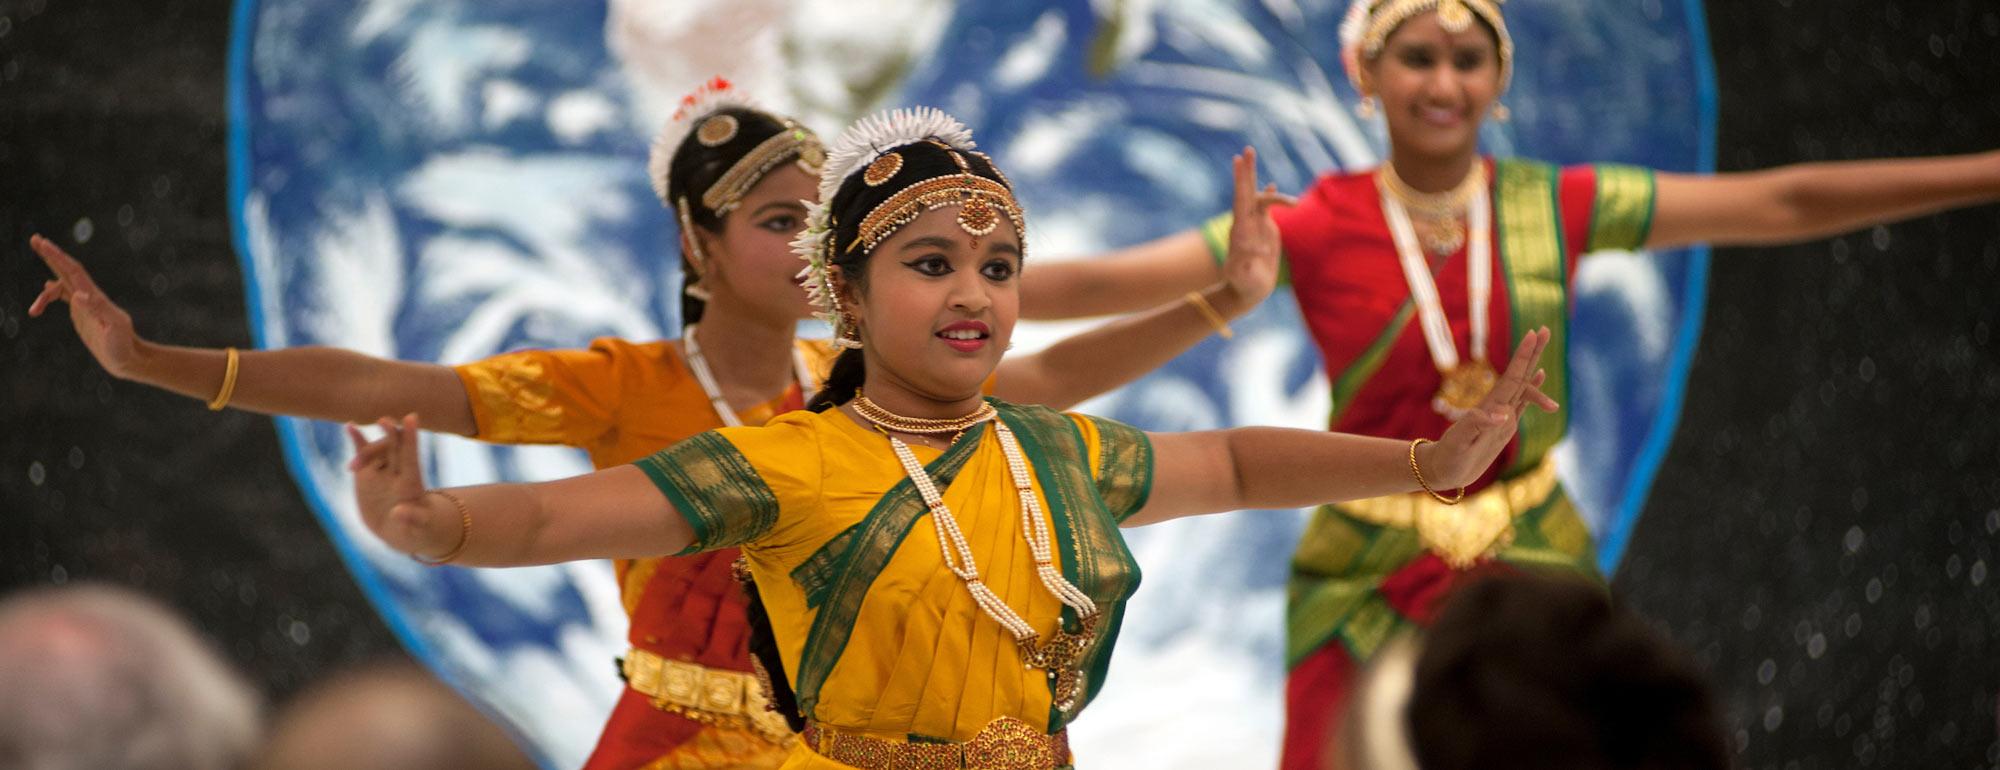 A group of young women preform a South Asian style dance